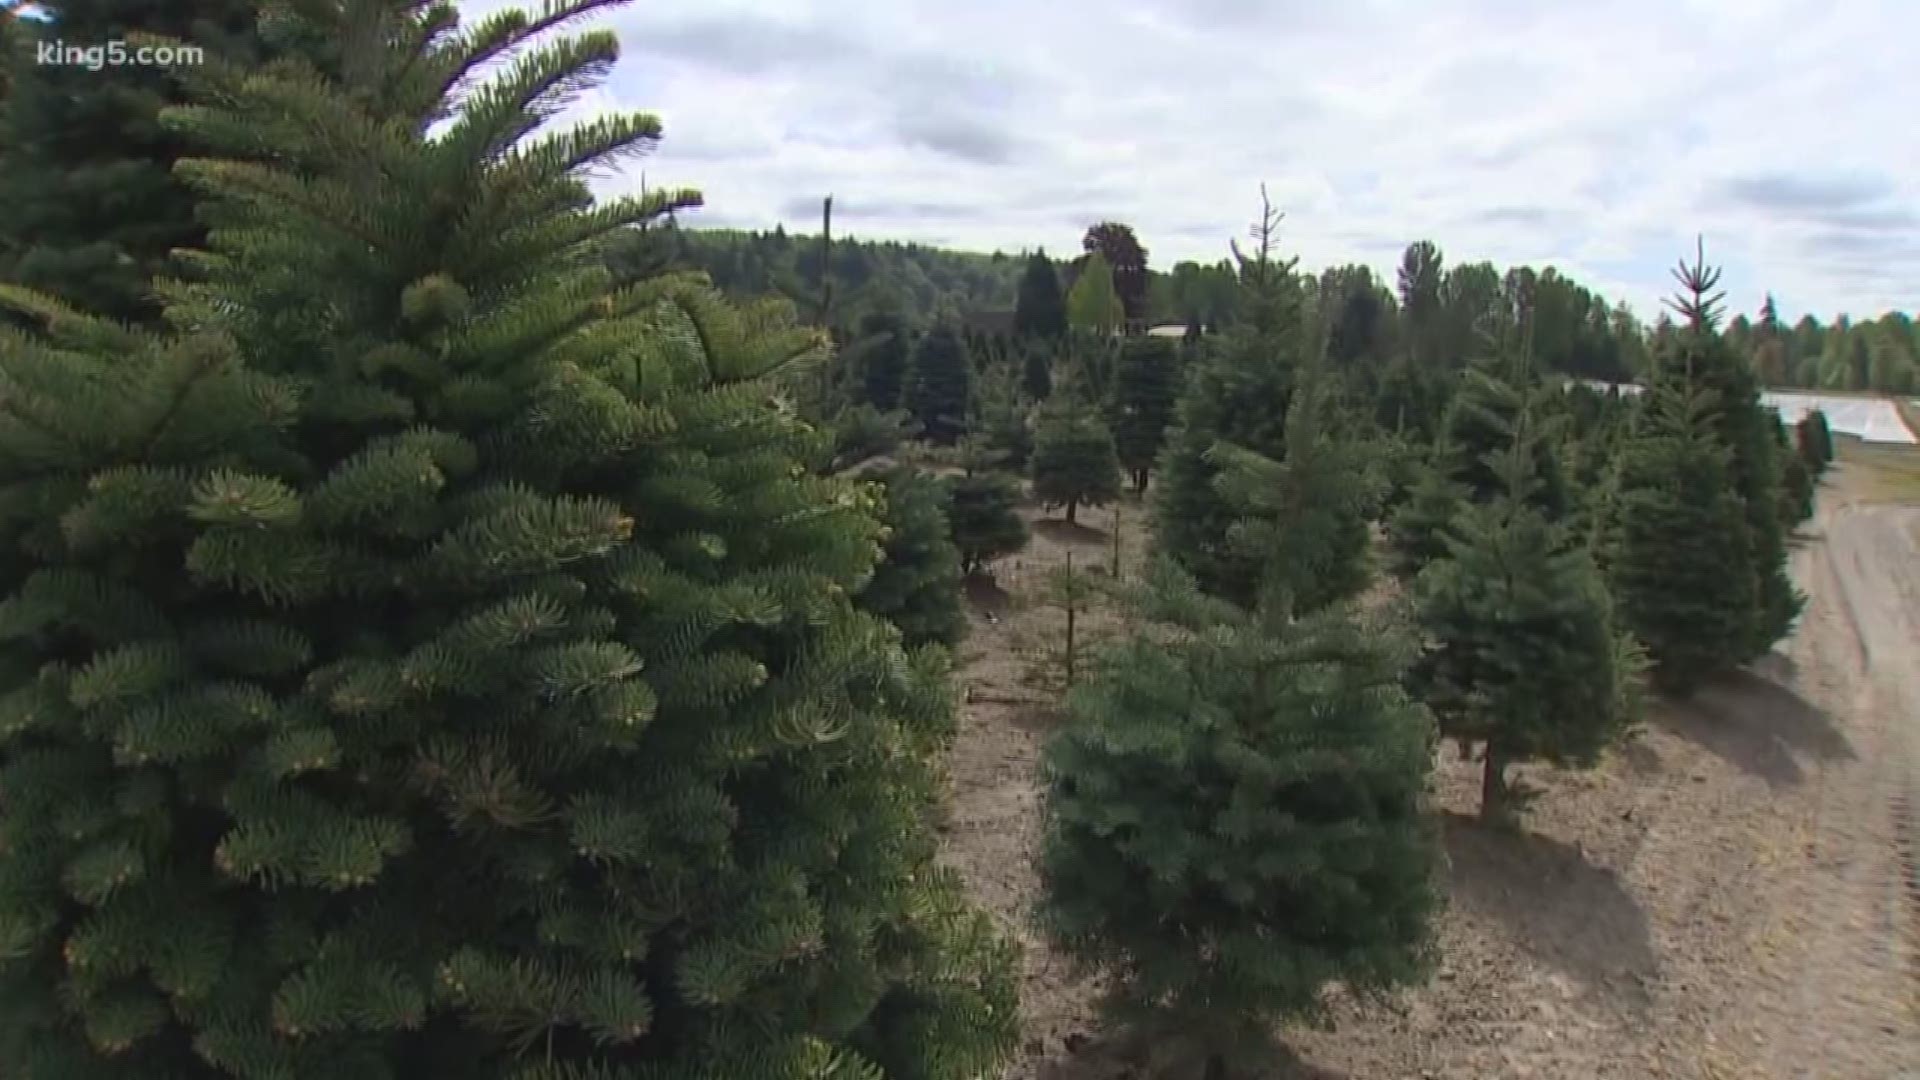 Here in the Pacific Northwest, we have some of the best soil for farming. In Eastern Washington, we grow world famous grapes for wine. It's also know as the hops capital of the world. We have local vegetable farms, dairy farms and so on. In this Pride of the PNW, Jordan Steele showcases one of the last large Christmas tree farms in Pierce County.